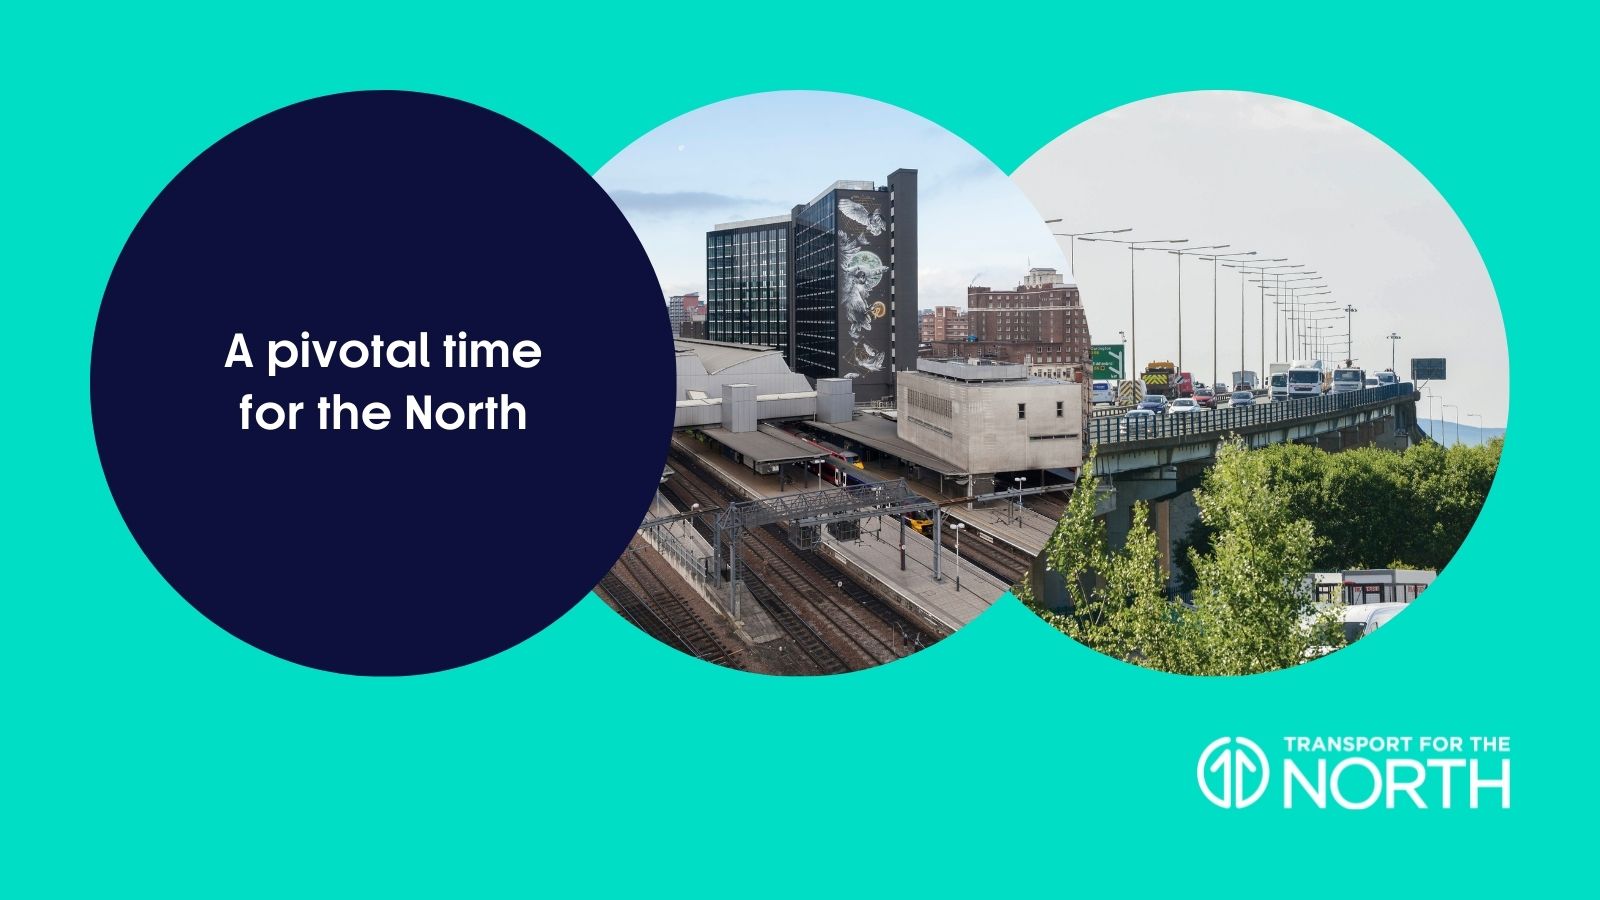 A pivotal time for the North